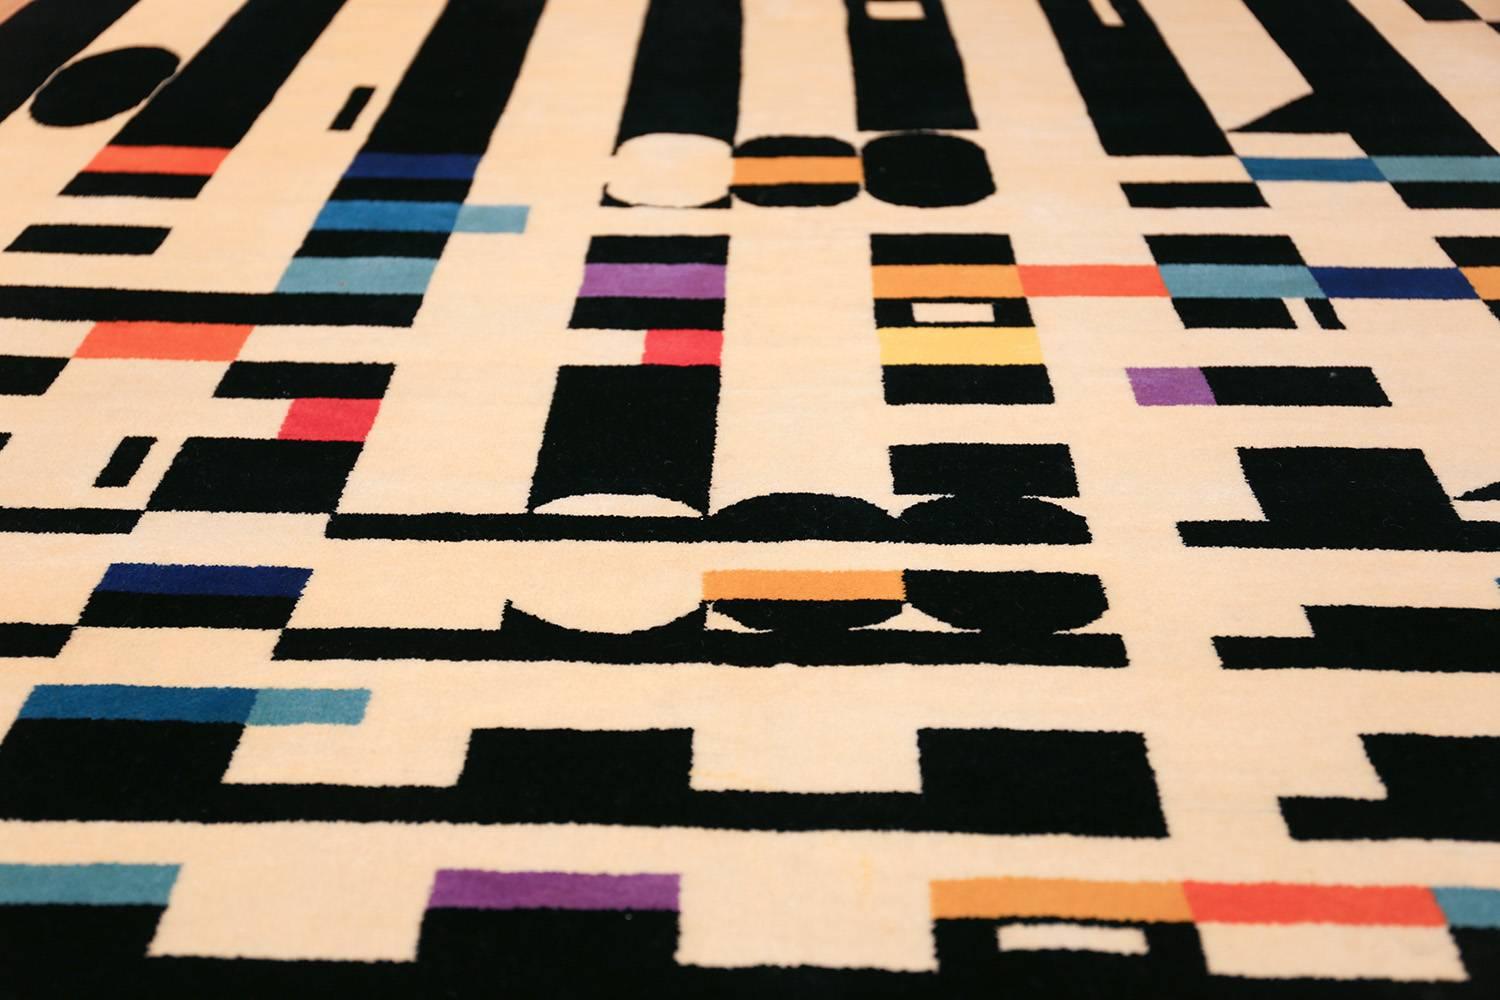 Wool Vintage Geometric Israeli Rug by Yaacov Agam. Size: 5 ft 7 in x 7 ft 1 in